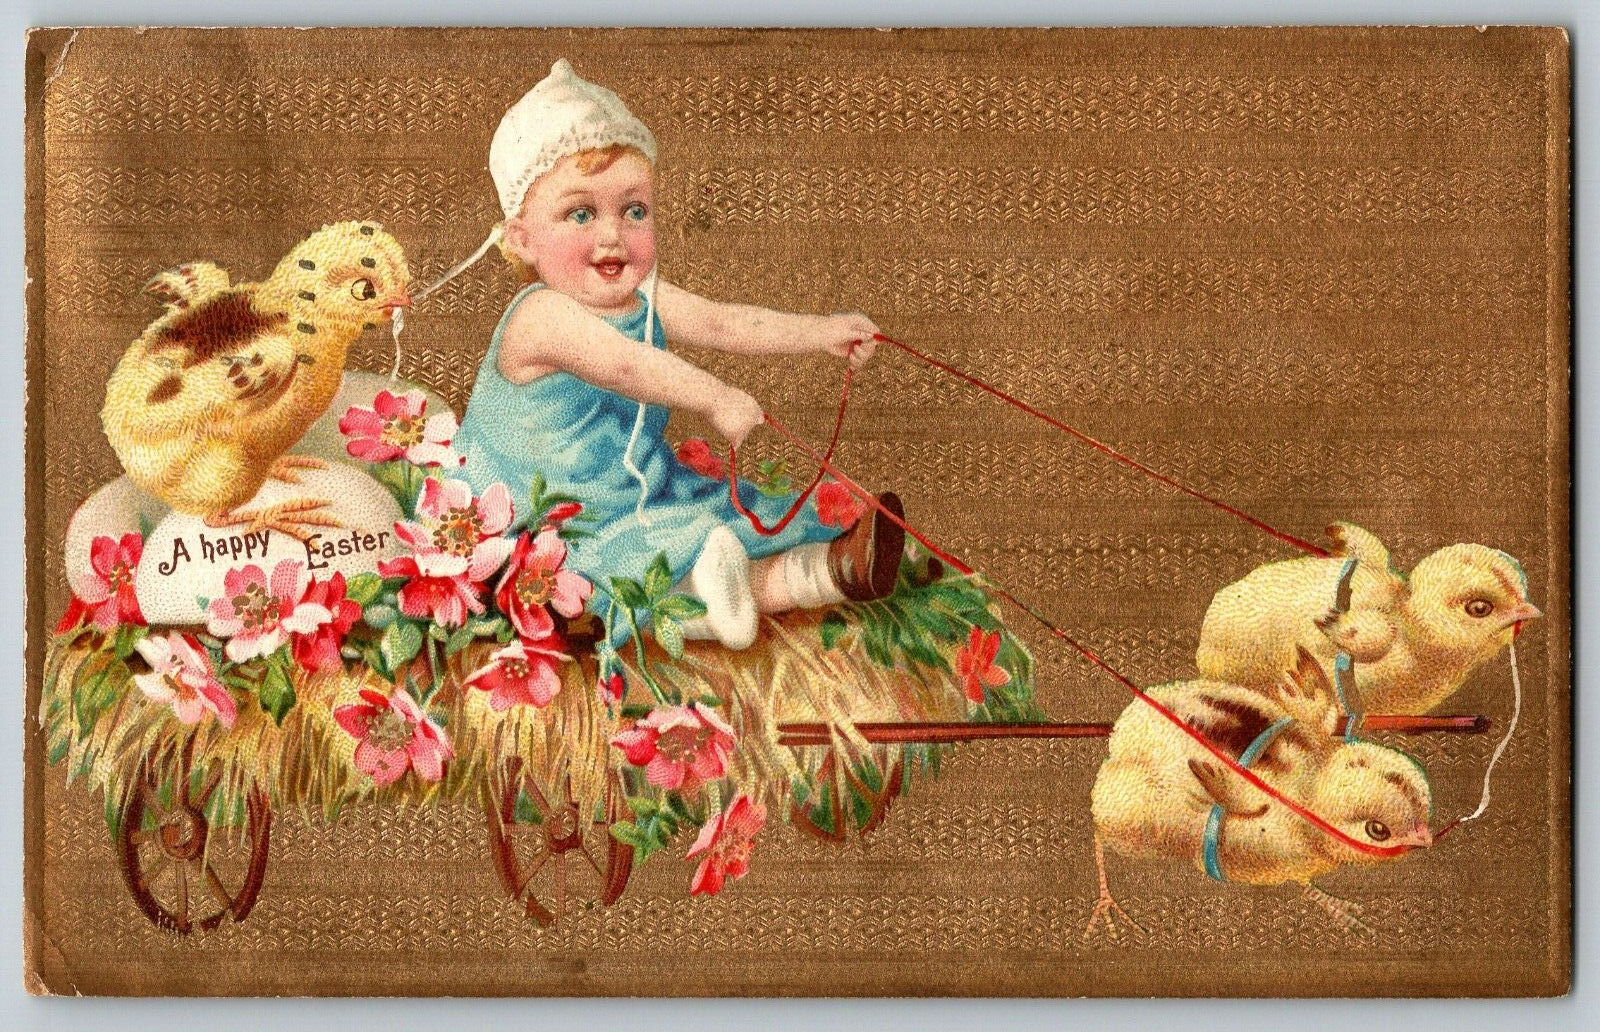 A Happy Easter - Easter Chicks Pulling Wagon & Baby  - Vintage Postcard, Posted